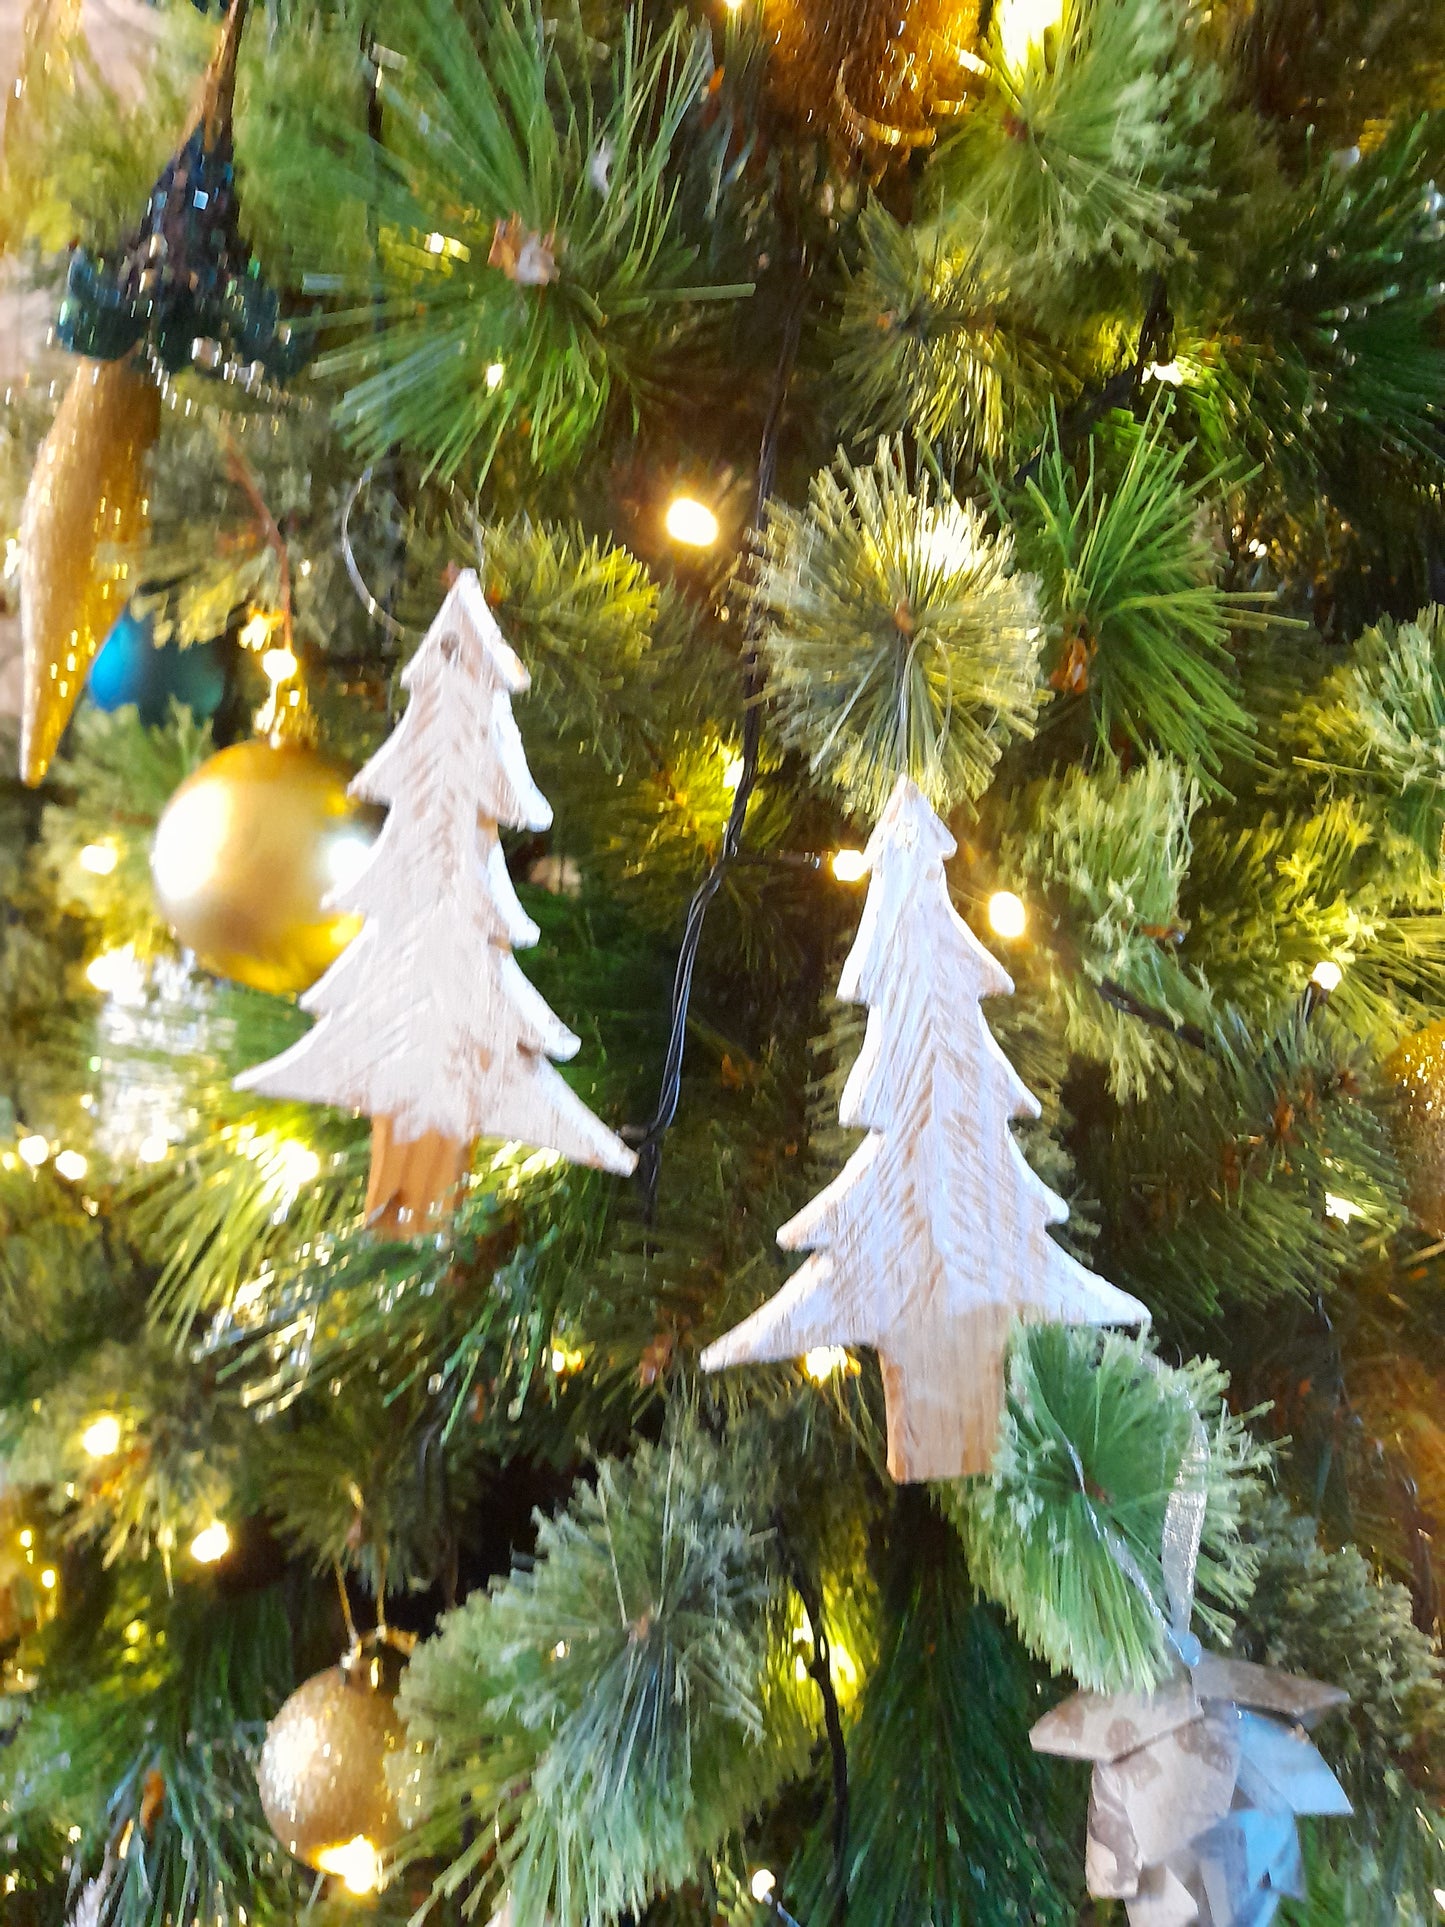 White wooden pine tree decorations